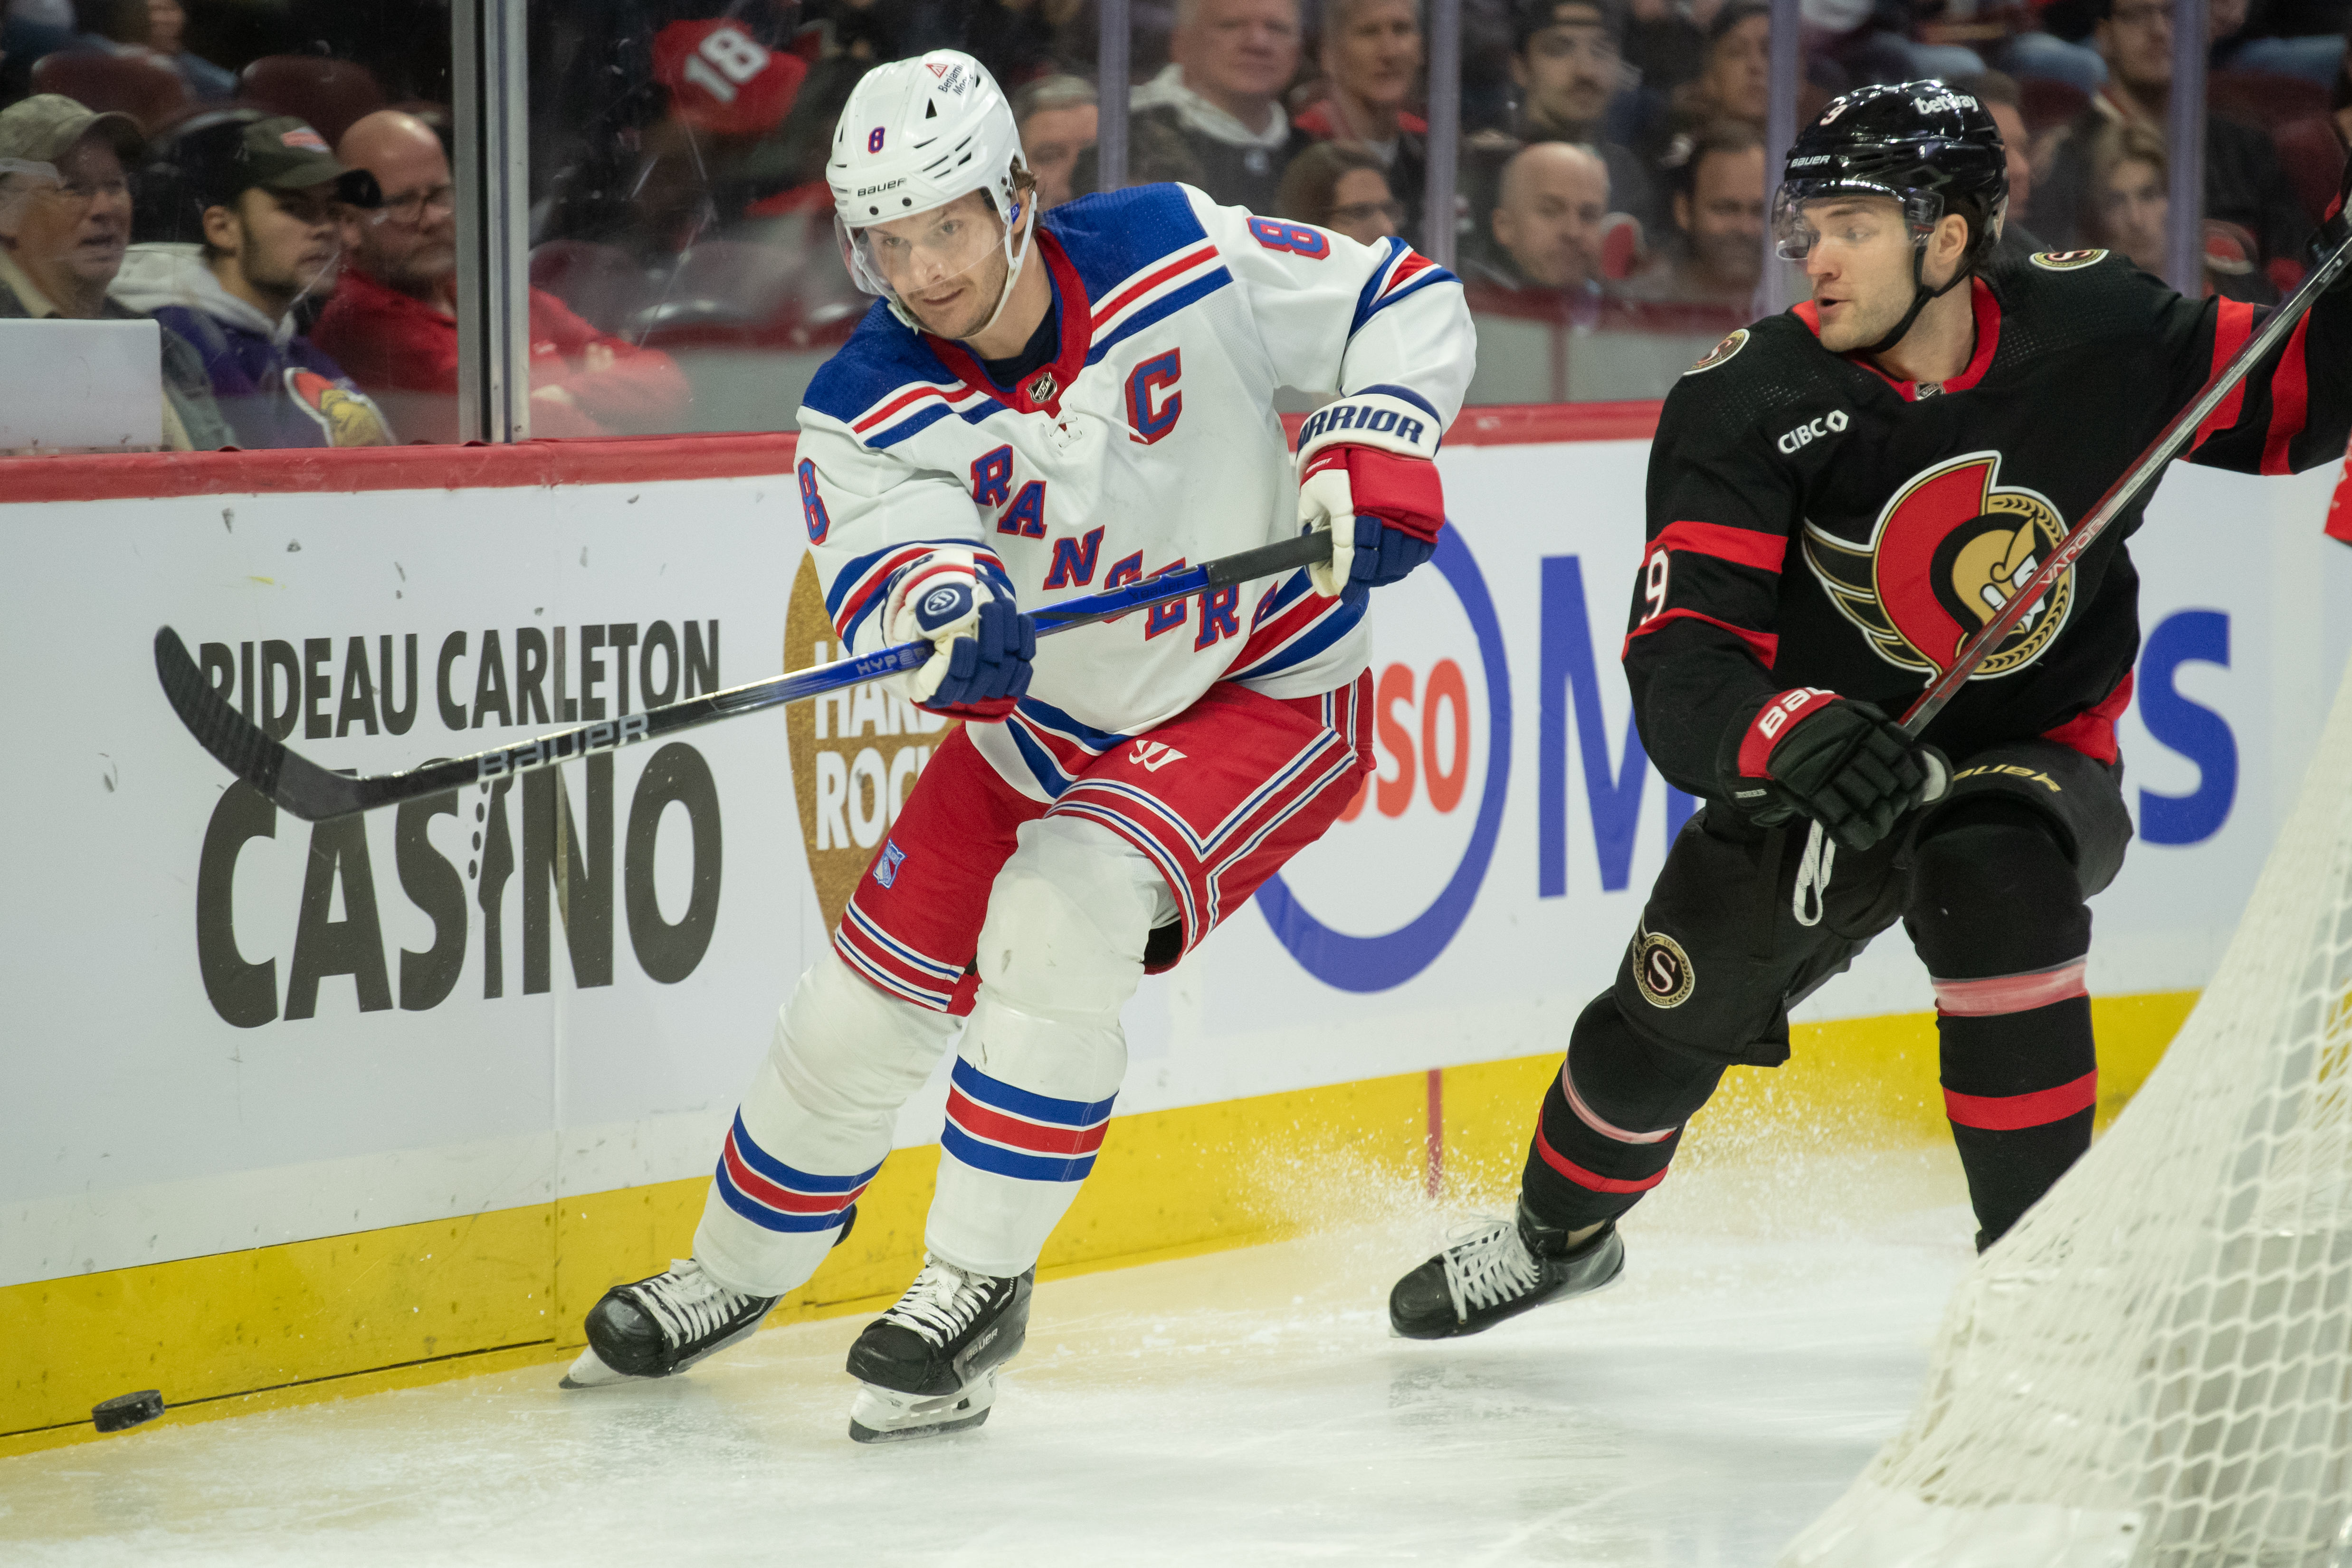 New York Rangers defenseman Jacob Trouba (8) moves the puck away from Ottawa Senators center Josh Norris (9) in the first period at the Canadian